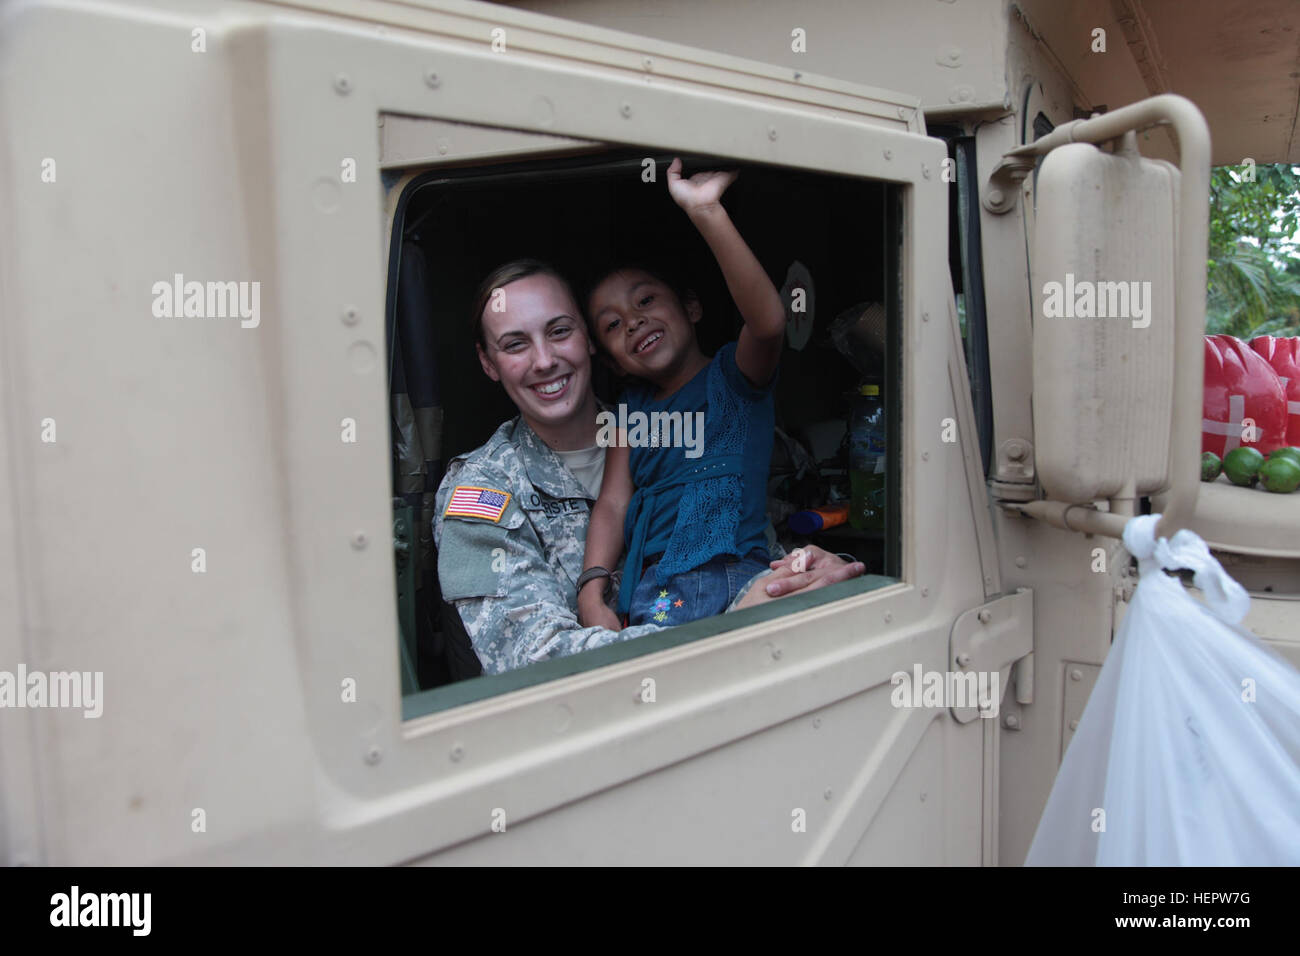 U.S. Army Spc. Elisha Oberste assigned to the 296th Medical Company Arkansas National Guard, holds a Guatemalan child in her lap inside a HMMV at the Catarina construction site, Guatemala, June 8, 2016. Task Force Red Wolf and Army South conducts Humanitarian Civil Assistance Training to include tactical level construction projects and Medical Readiness Training Exercises providing medical access and building schools in Guatemala with the Guatemalan Government and non-government agencies from 05MAR16 to 18JUN16 in order to improve the mission readiness of US forces and to provide a lasting ben Stock Photo